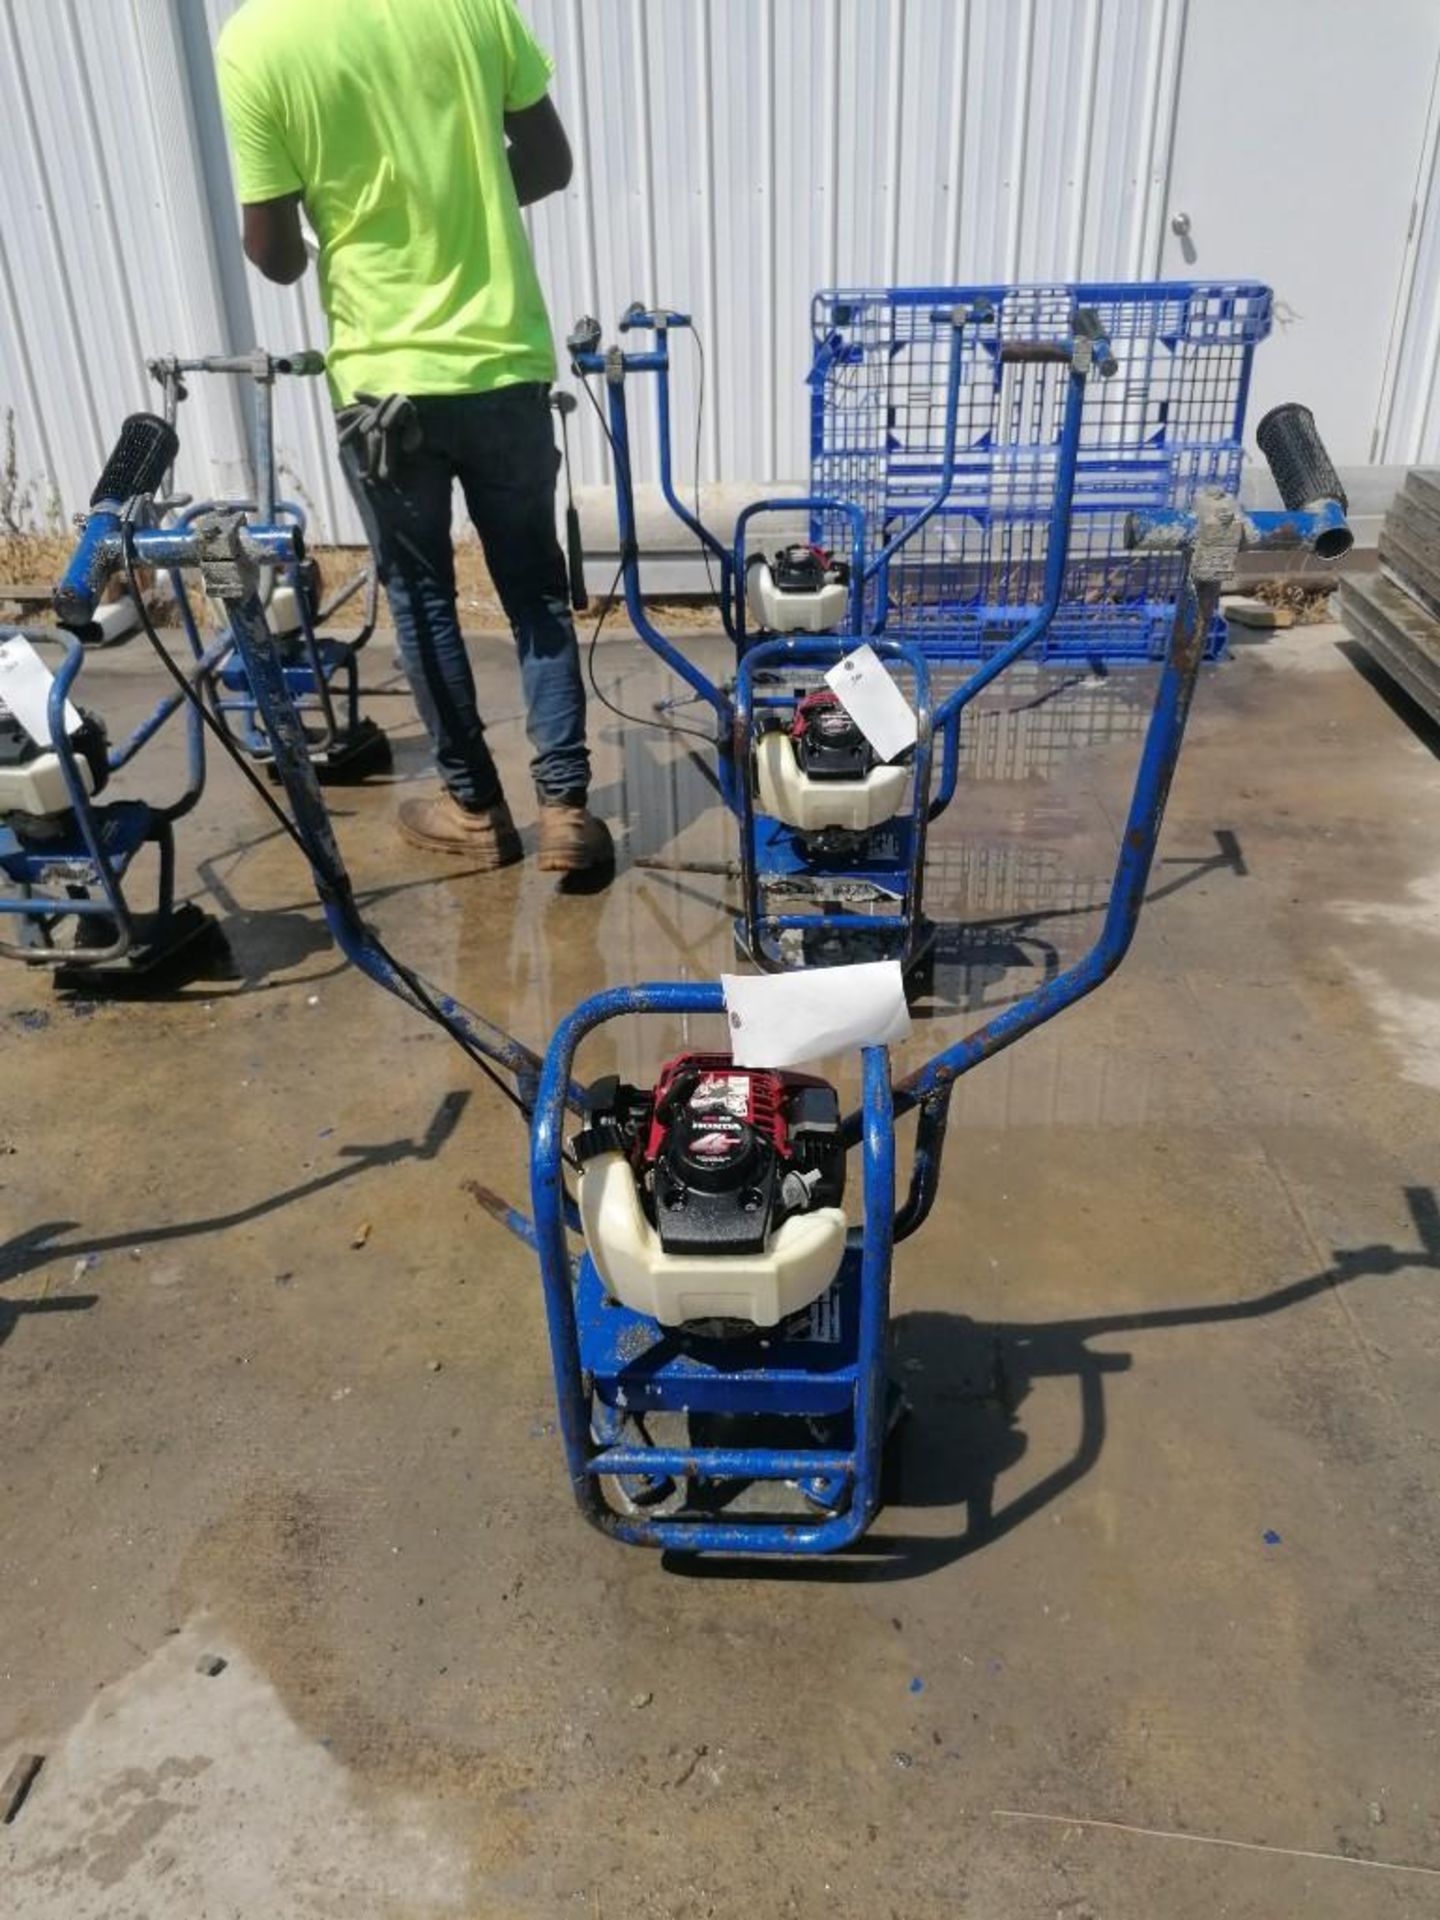 Shockwave Power Screed with Honda GX35 Motor, Serial #4548, 50 Hours. Located at 301 E Henry Street,